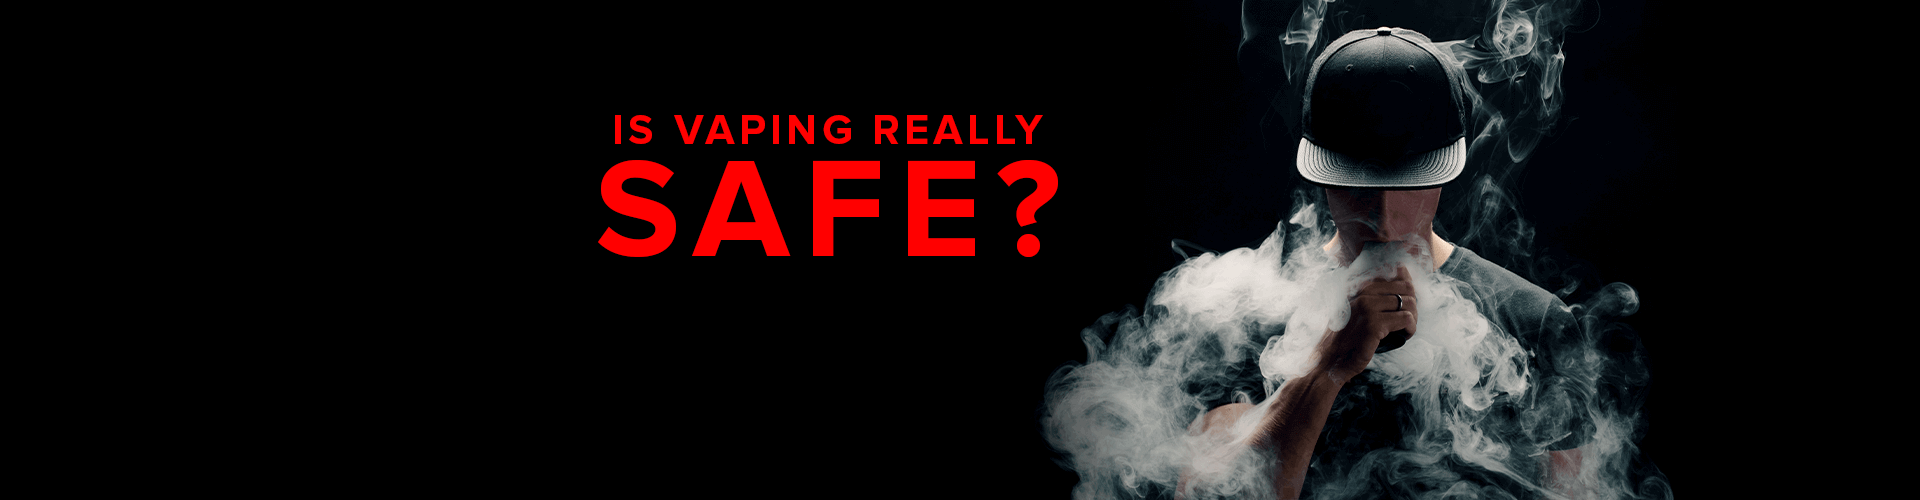 Is Vaping Really Safe? The Ultimate Guide to Vaping Safely - 888 Vapour